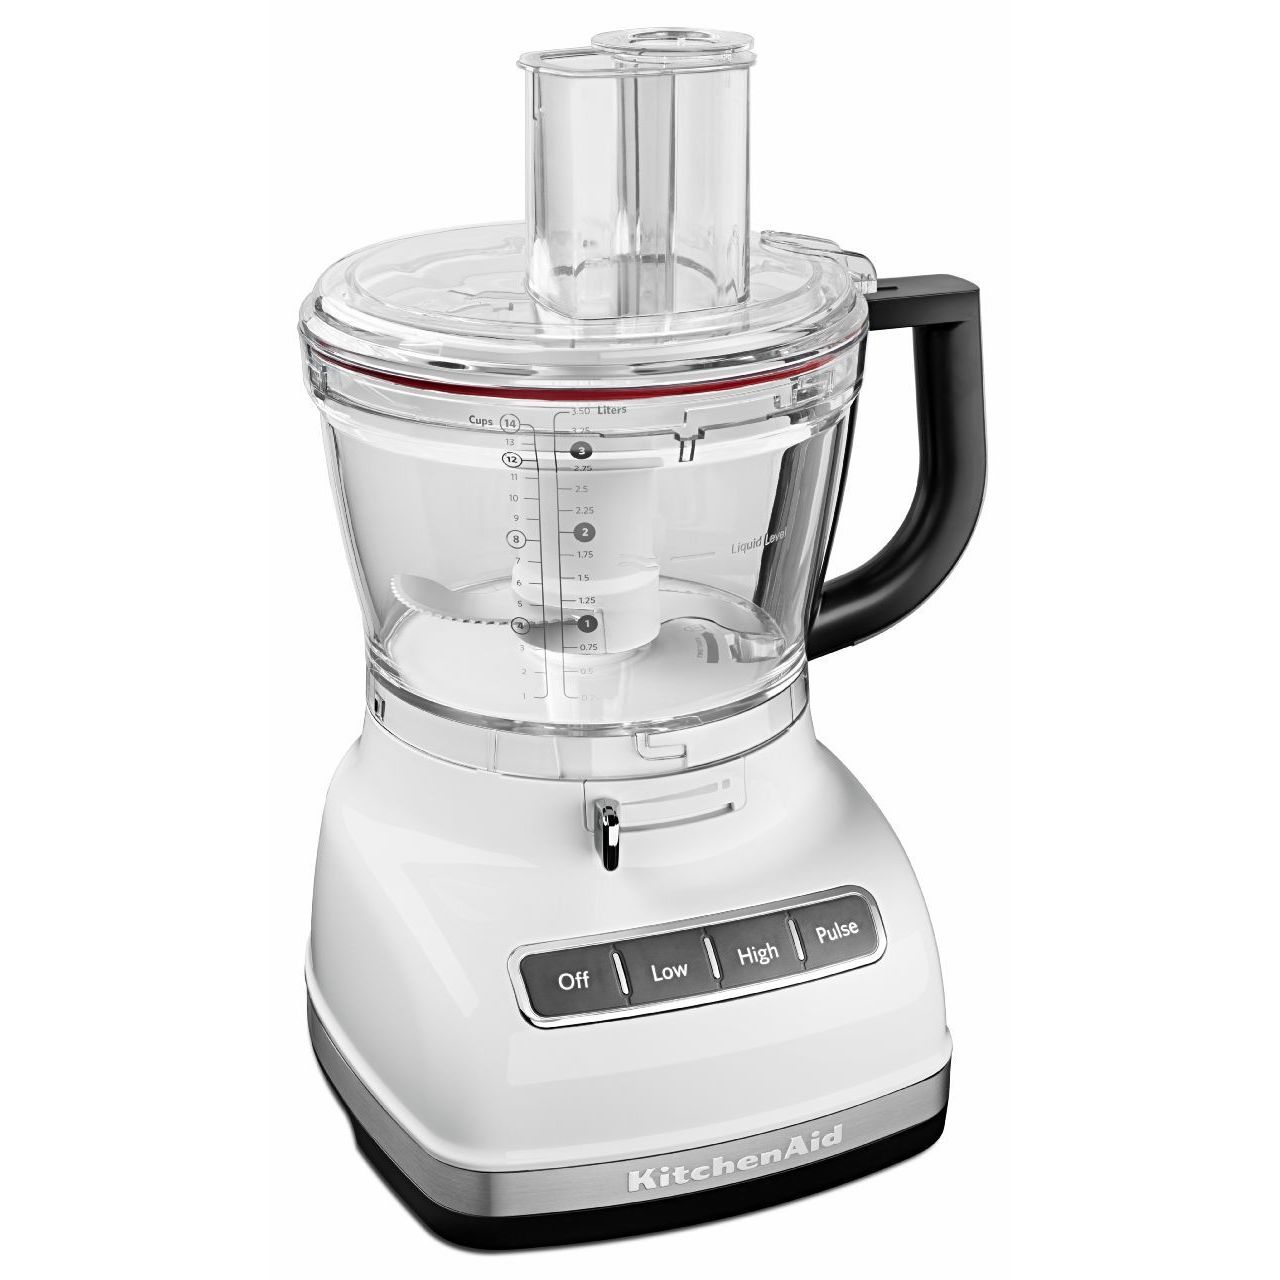 https://ak1.ostkcdn.com/images/products/9246150/KitchenAid-KFP1466-14-cup-Food-Processor-with-Commercial-style-Dicing-Kit-5d0e7c1c-4efd-4b4d-8dd6-6b02c69dbf14.jpg